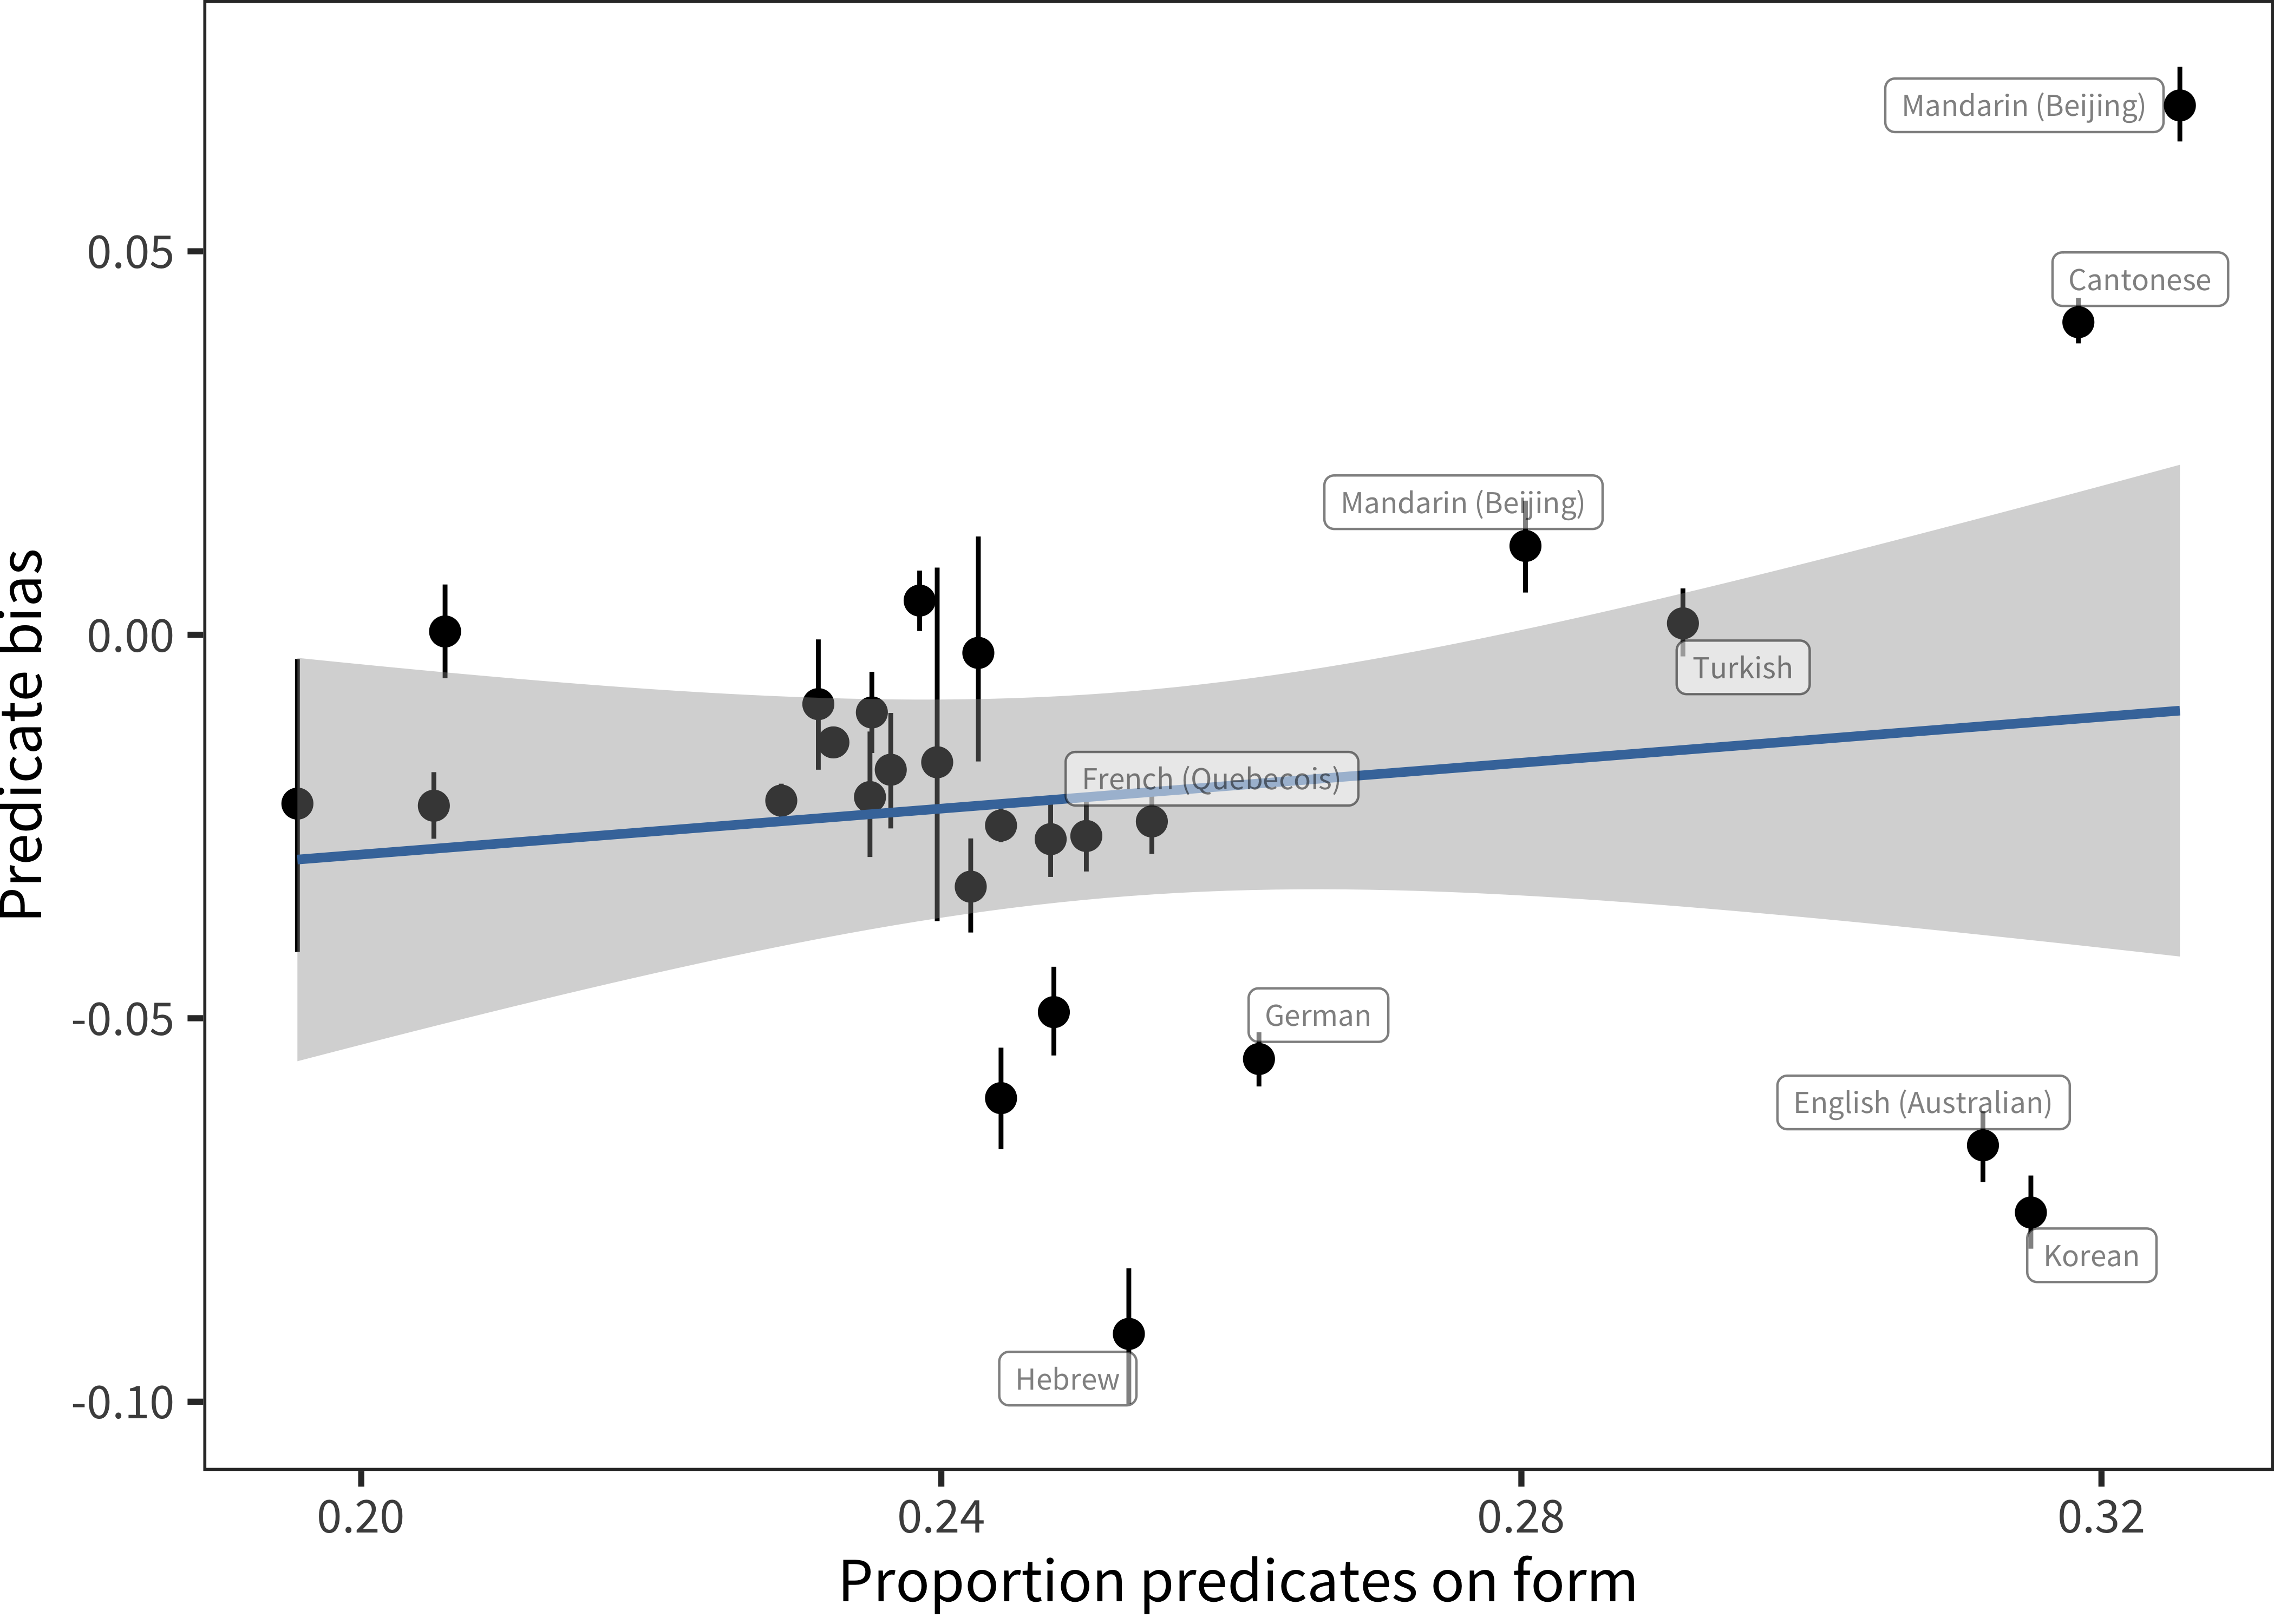 Relative representation in vocabulary for predicates as a function of proportion of predicates on form for comprehension data in each language, with languages labelled whose proportion of predicates is greater than 0.25 (line ranges indicate bootstrapped 95\% confidence intervals). Blue line show linear model fit.